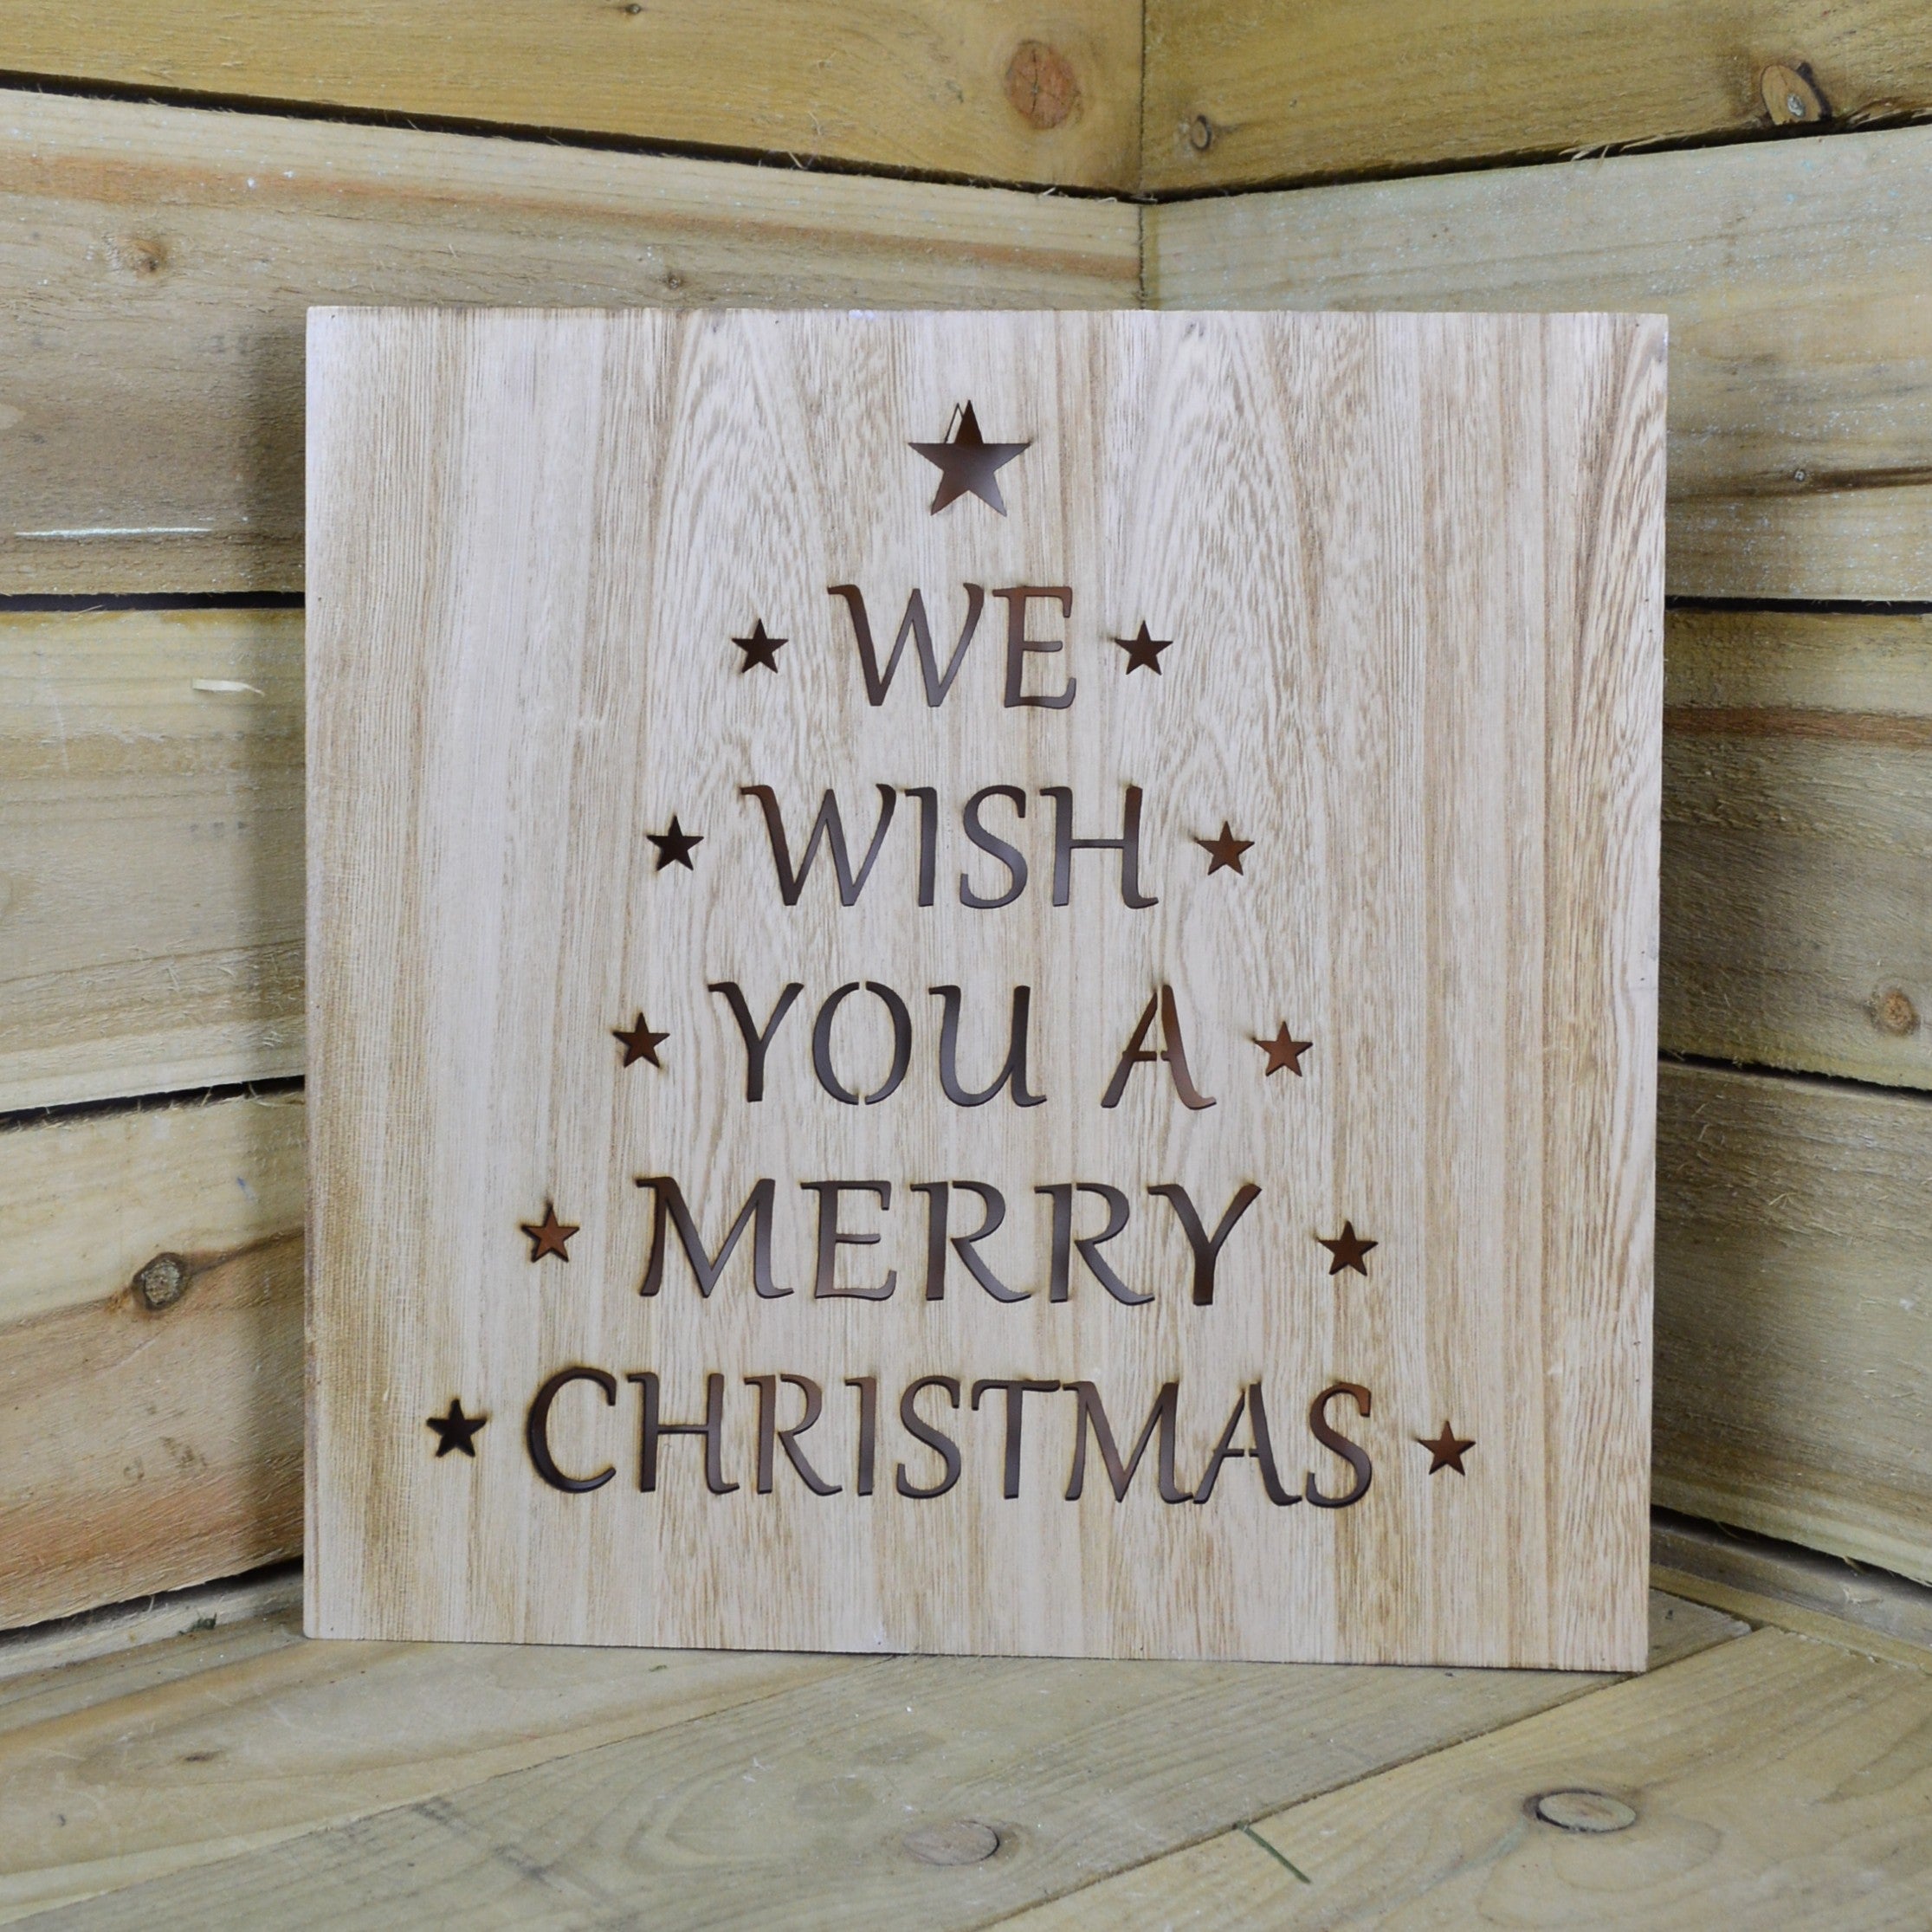 40cm x 40cm We Wish You a Merry Christmas Wooden Canvas With LEDs, 2 Styles